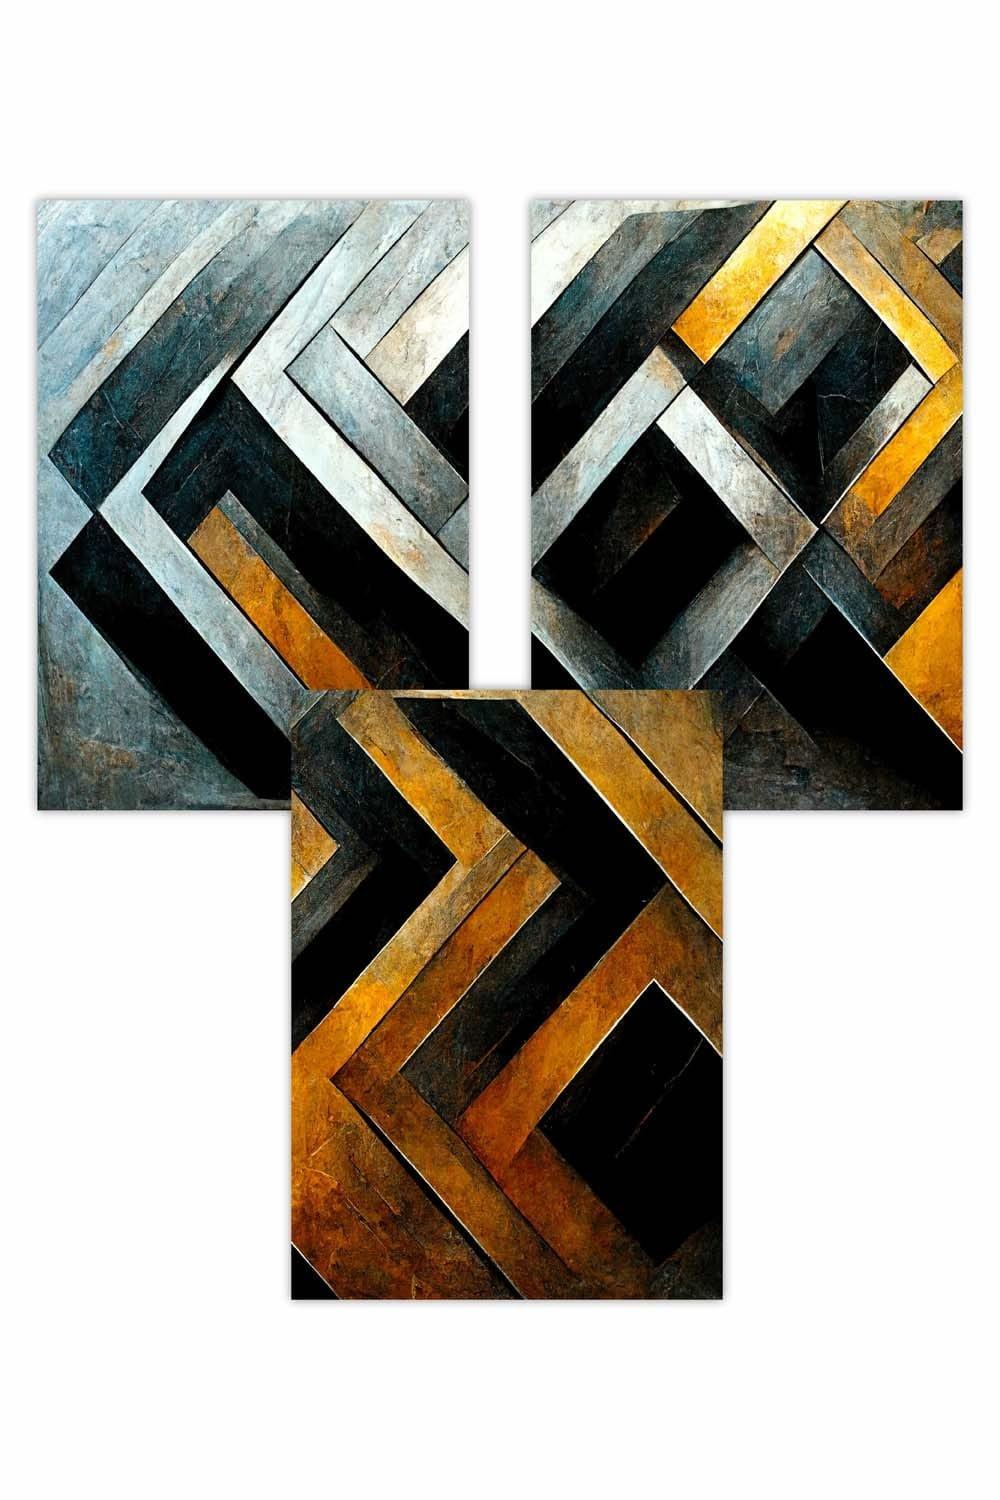 Set of 3 Abstract Metallic Distressed Mosaic Art Posters